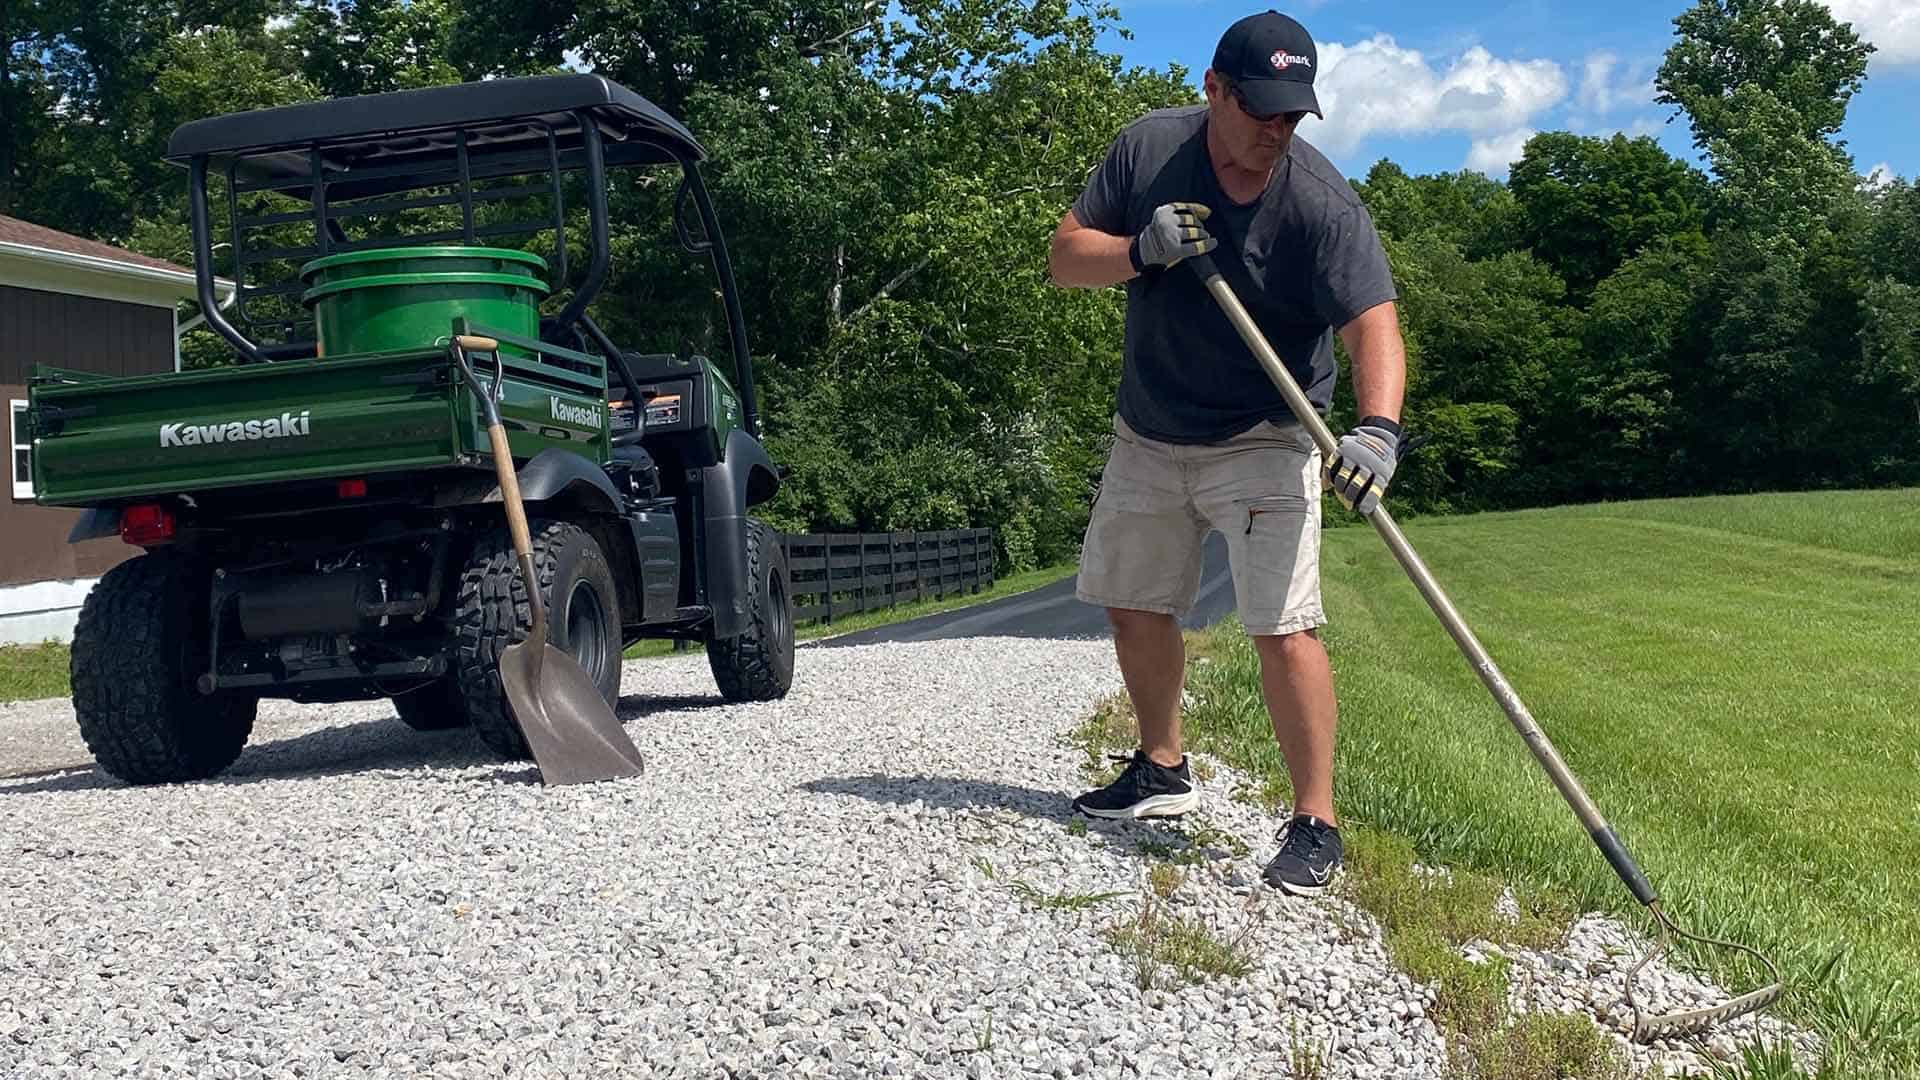 Driveway maintenance on rural property can be a big chore